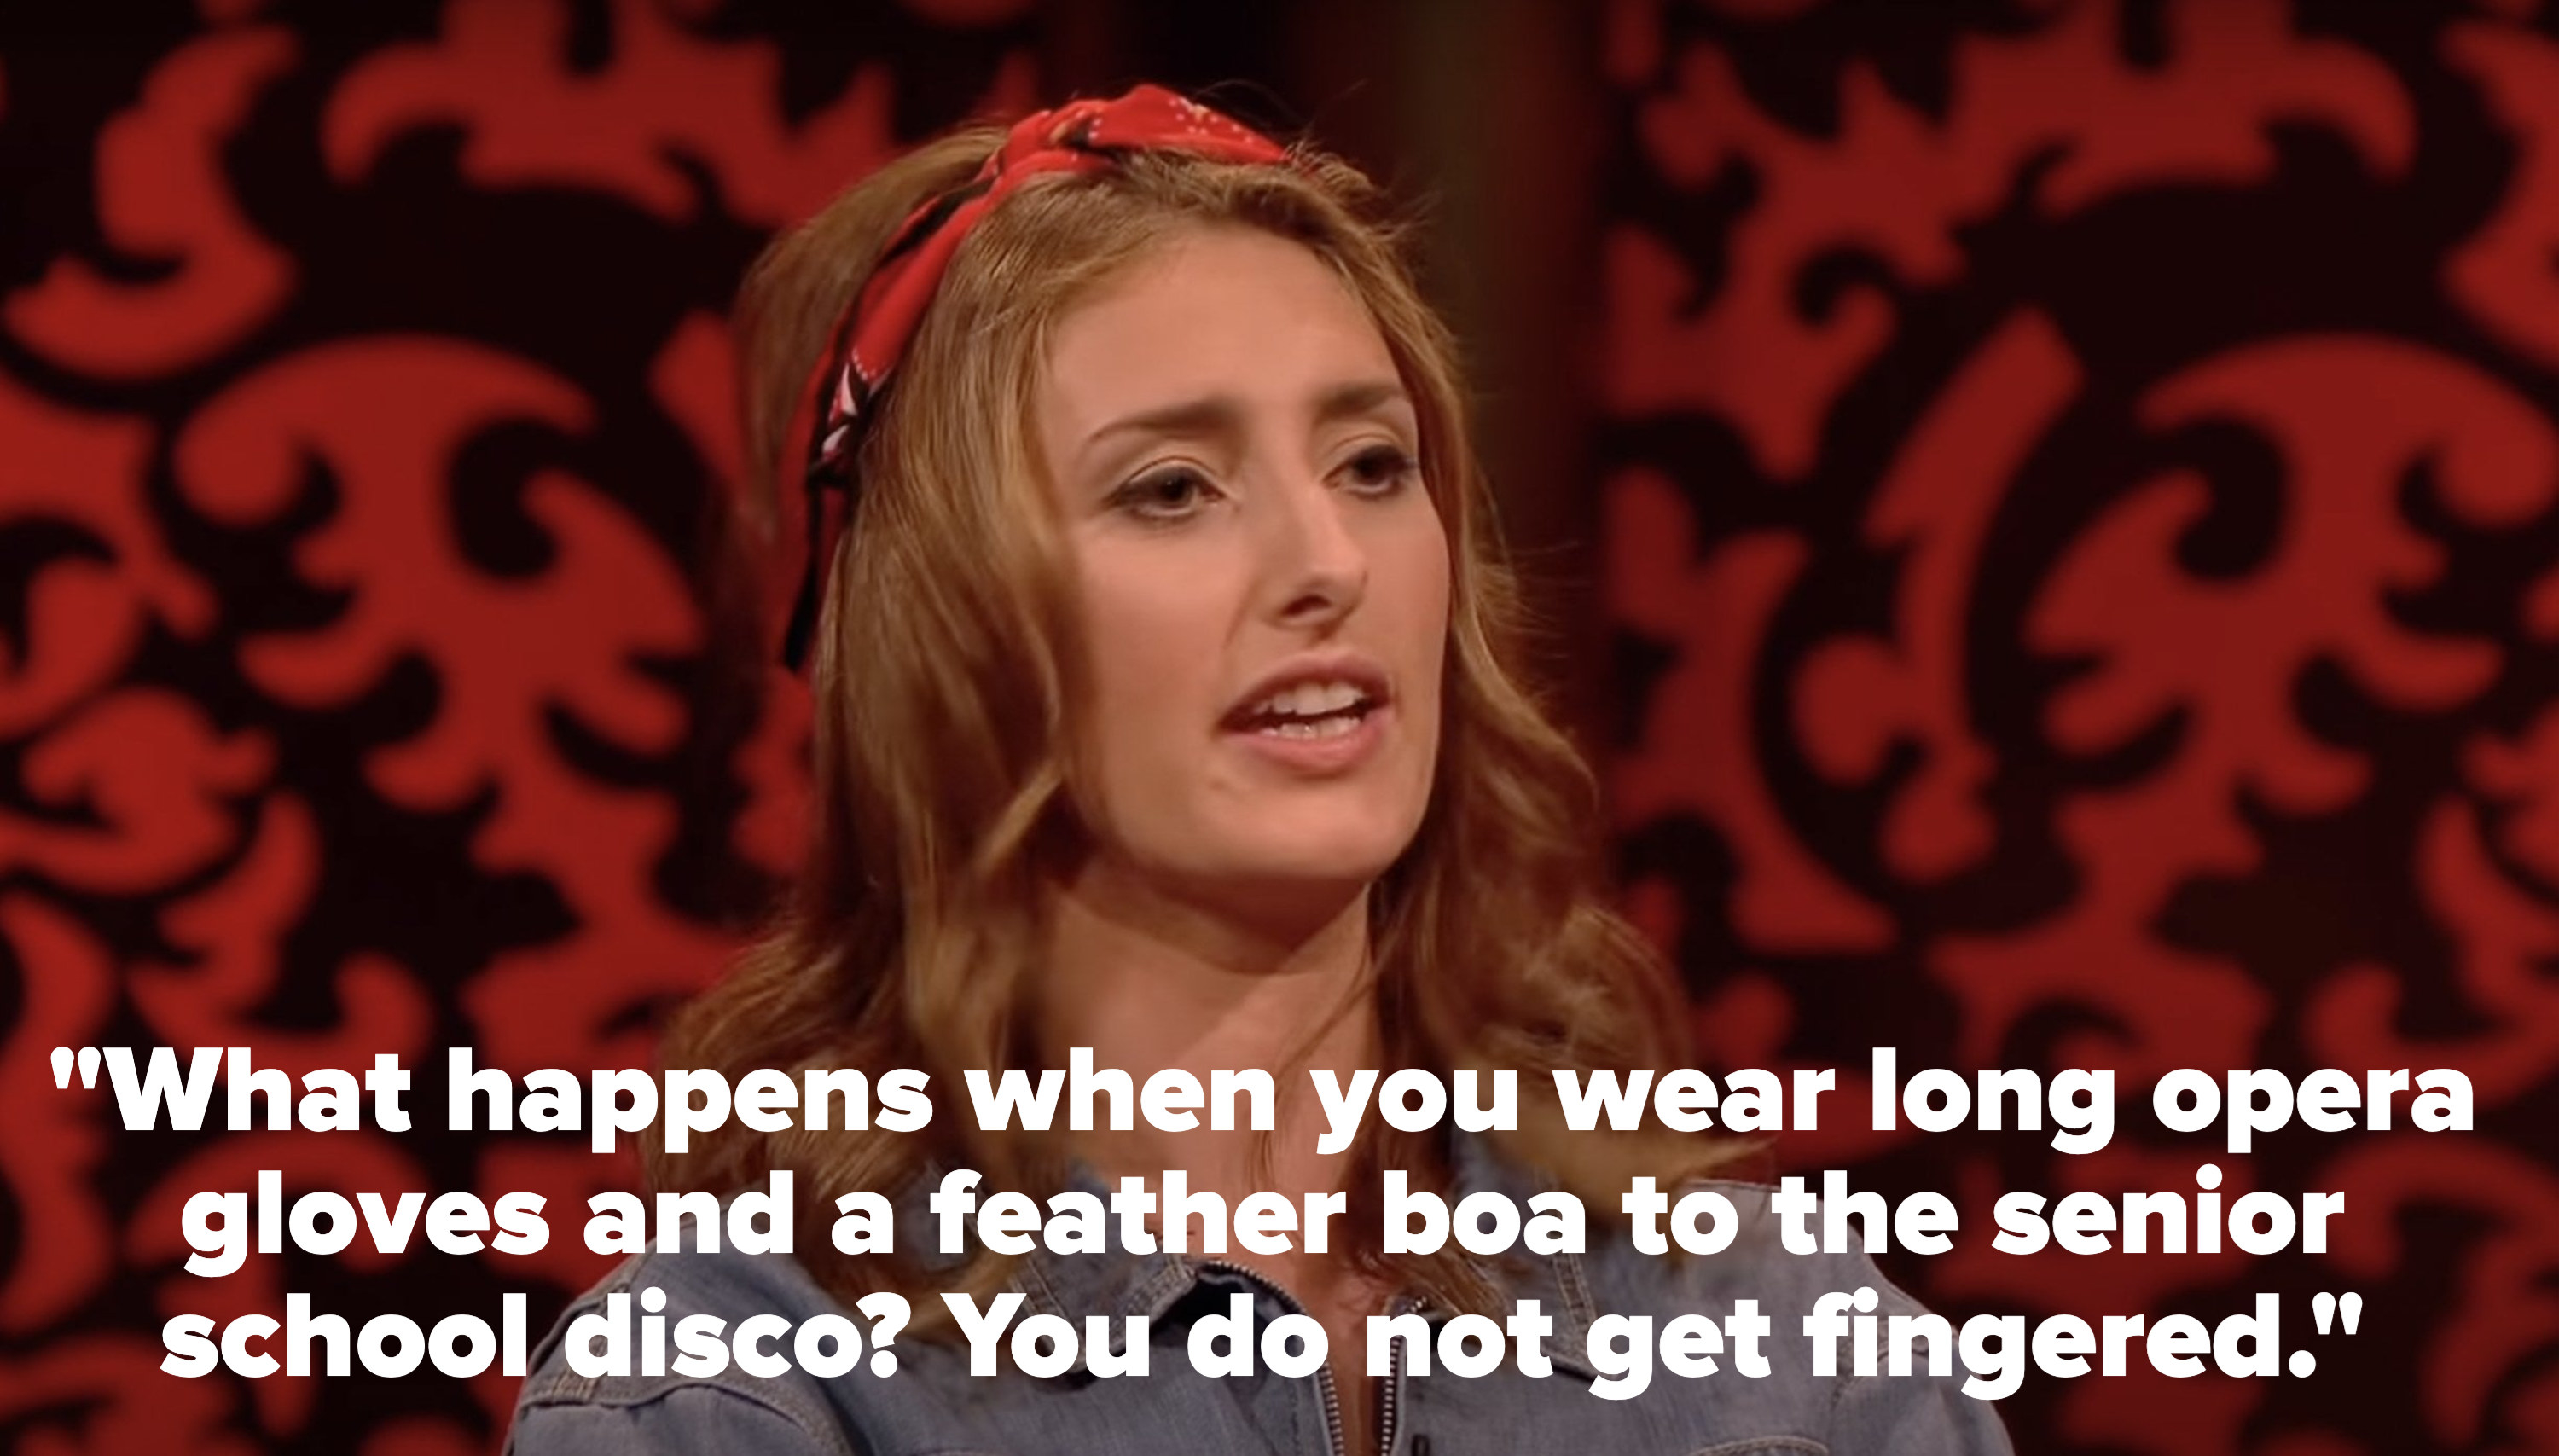 Jessica Knappett says, What happens when you wear long opera gloves and a feather boa to the senior school disco, You do not get fingered